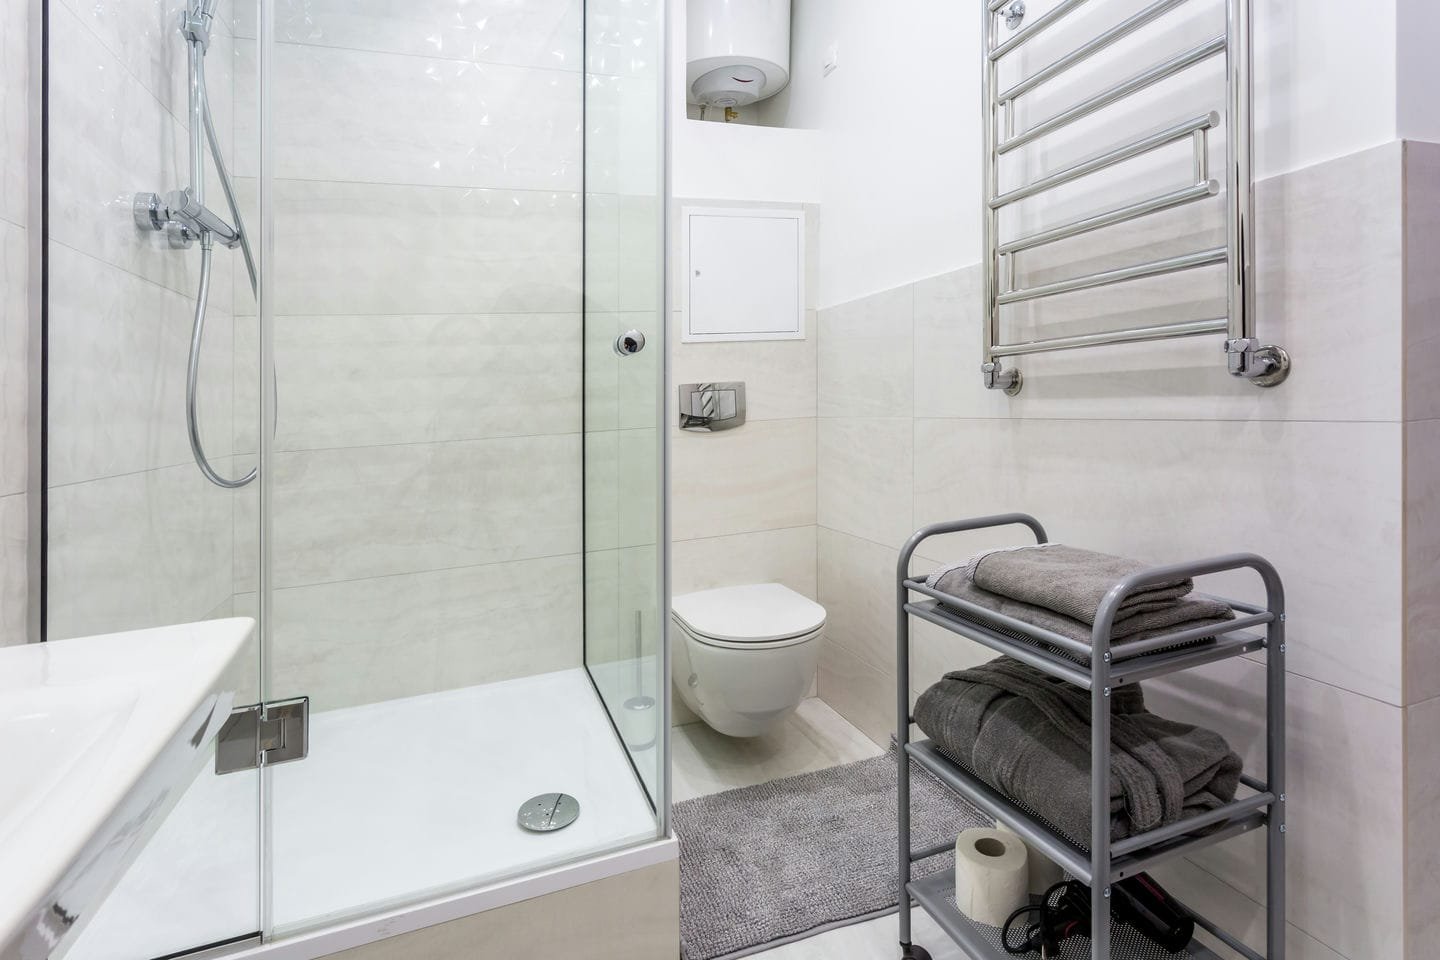 Professional Bathroom Remodeling Services in Glendale, WI